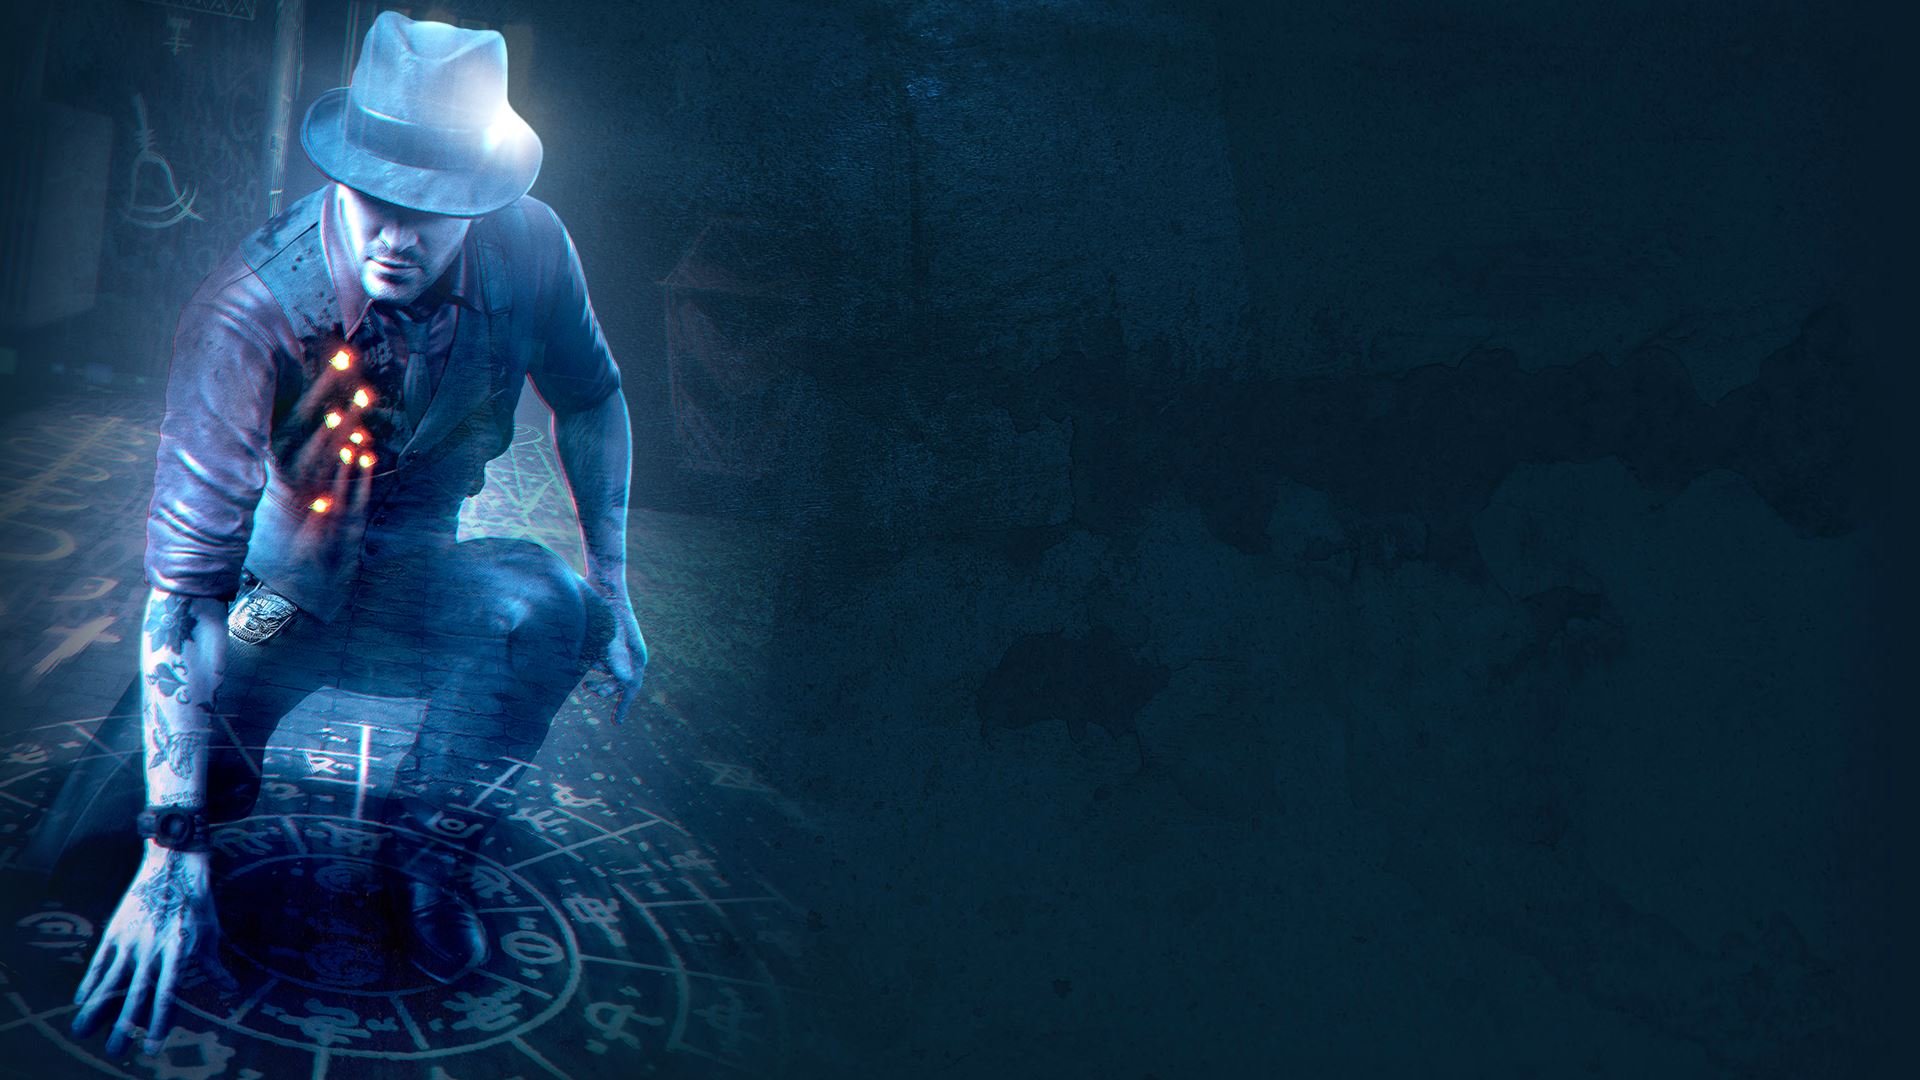 free download murdered soul suspect game